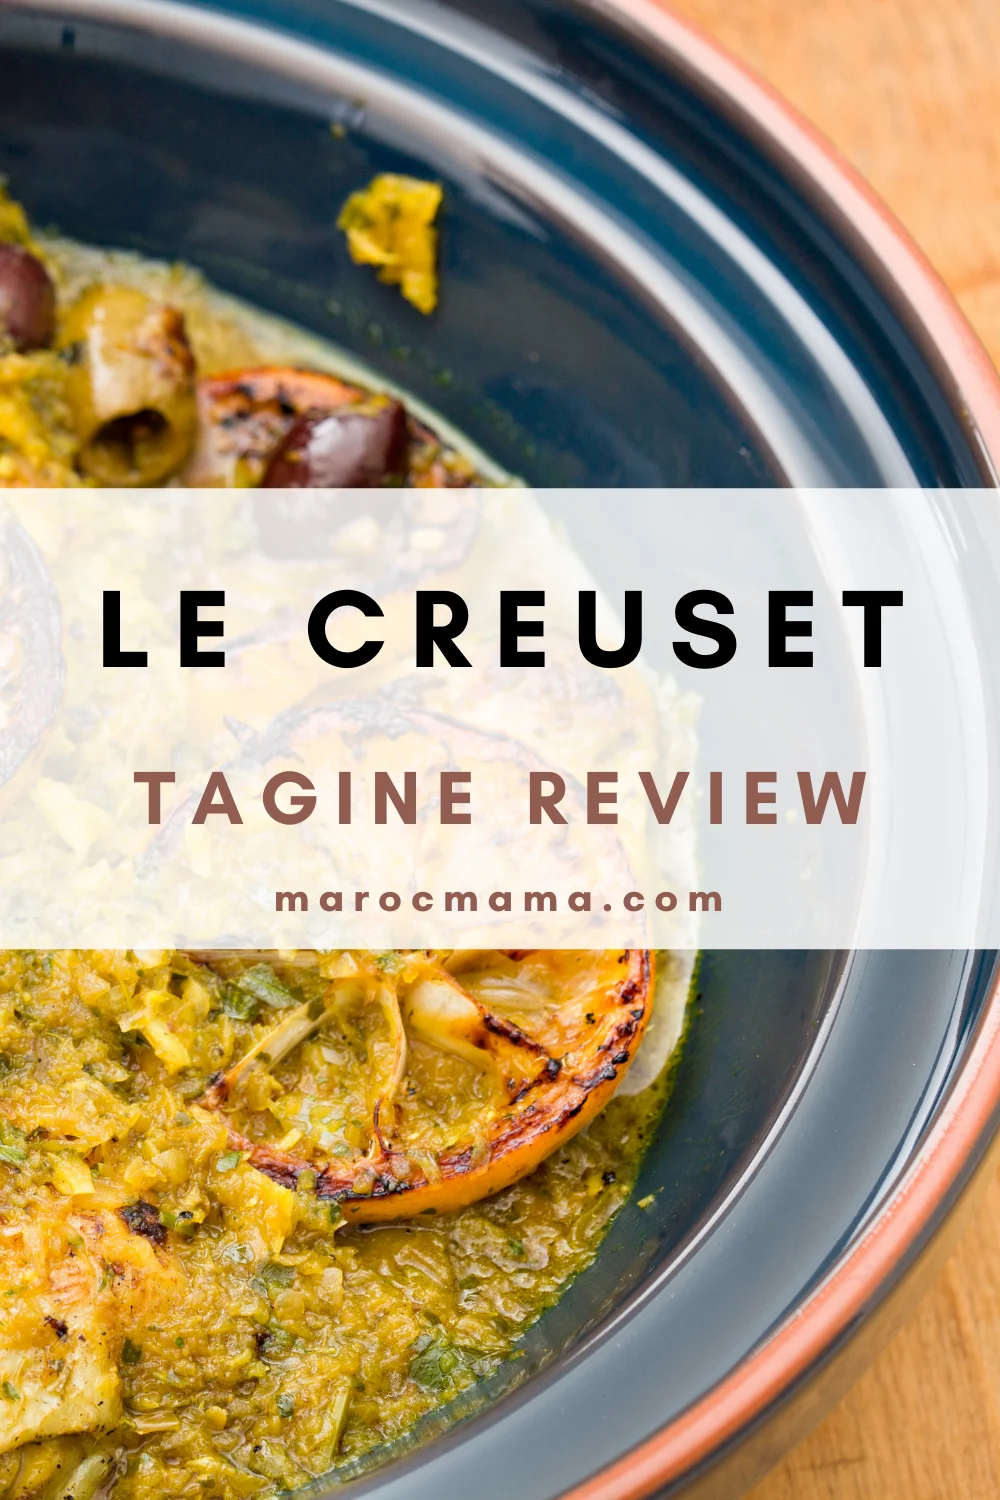 Le Creuset Tagine Review - Is it Worth It? - MarocMama